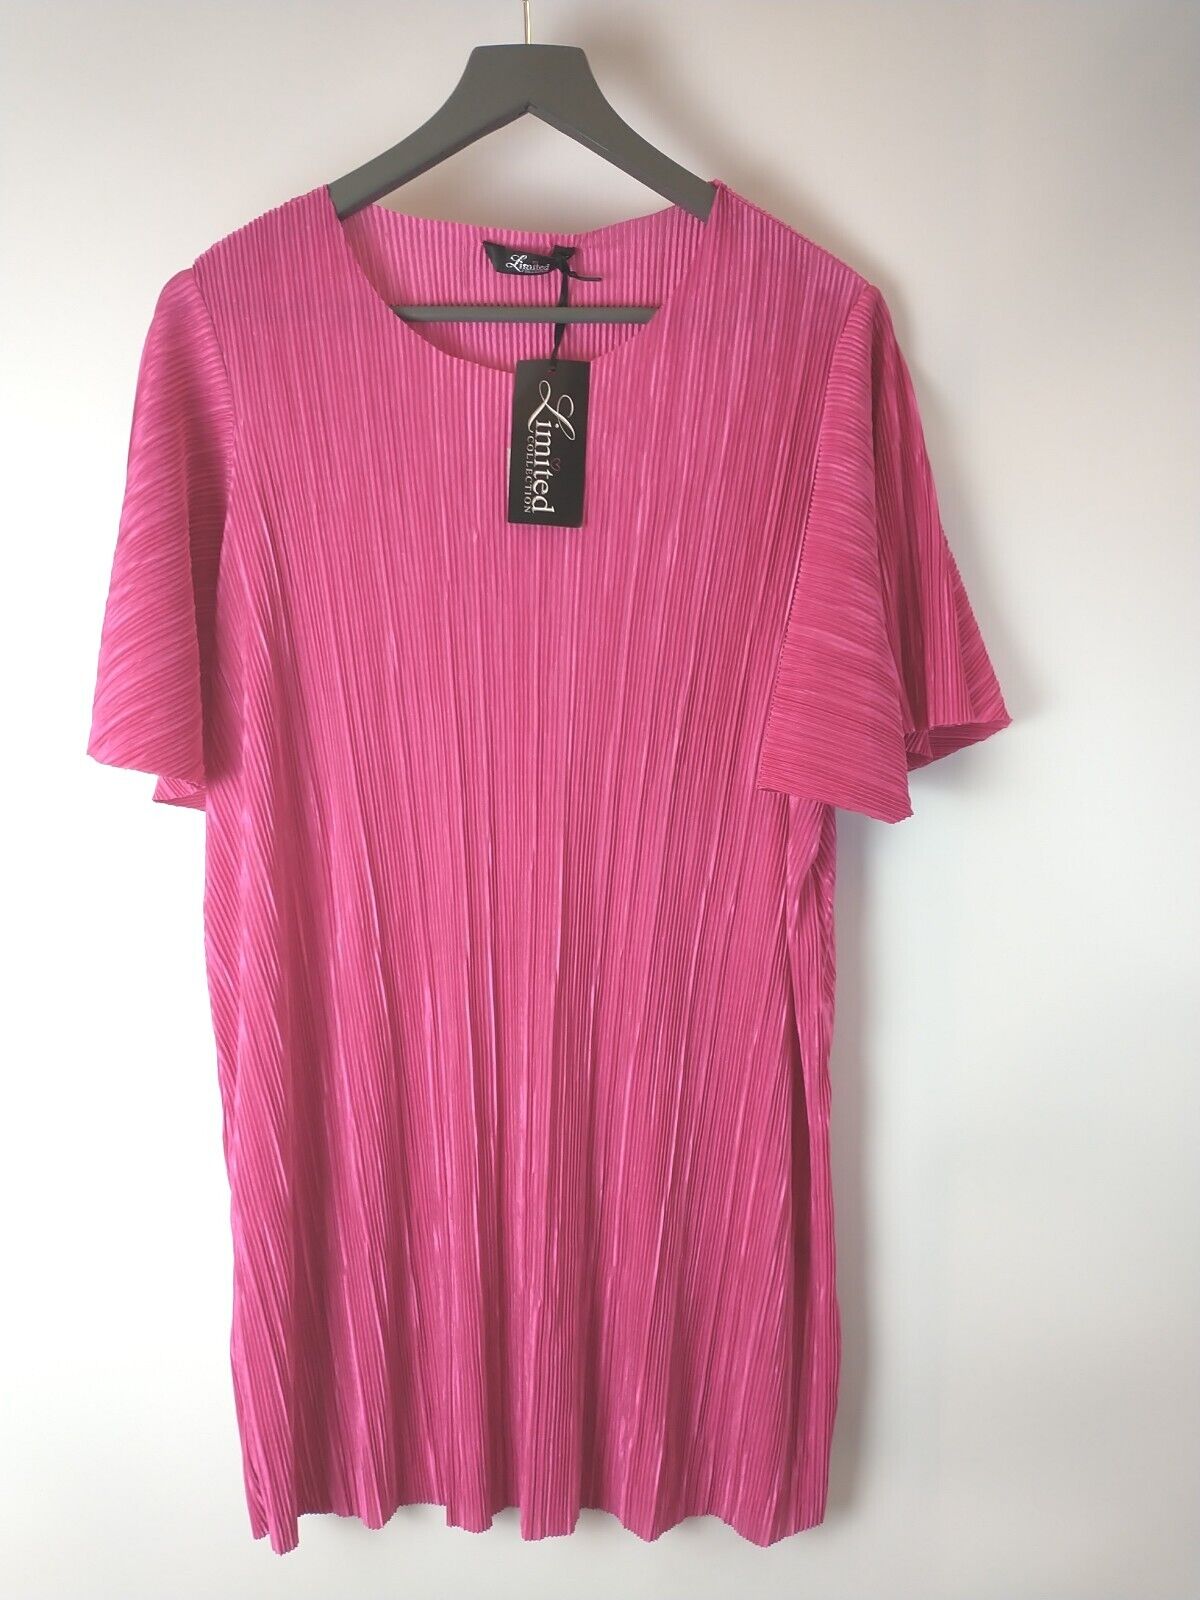 Yours Limited Collection Women's Pink Top. UK 22-24.